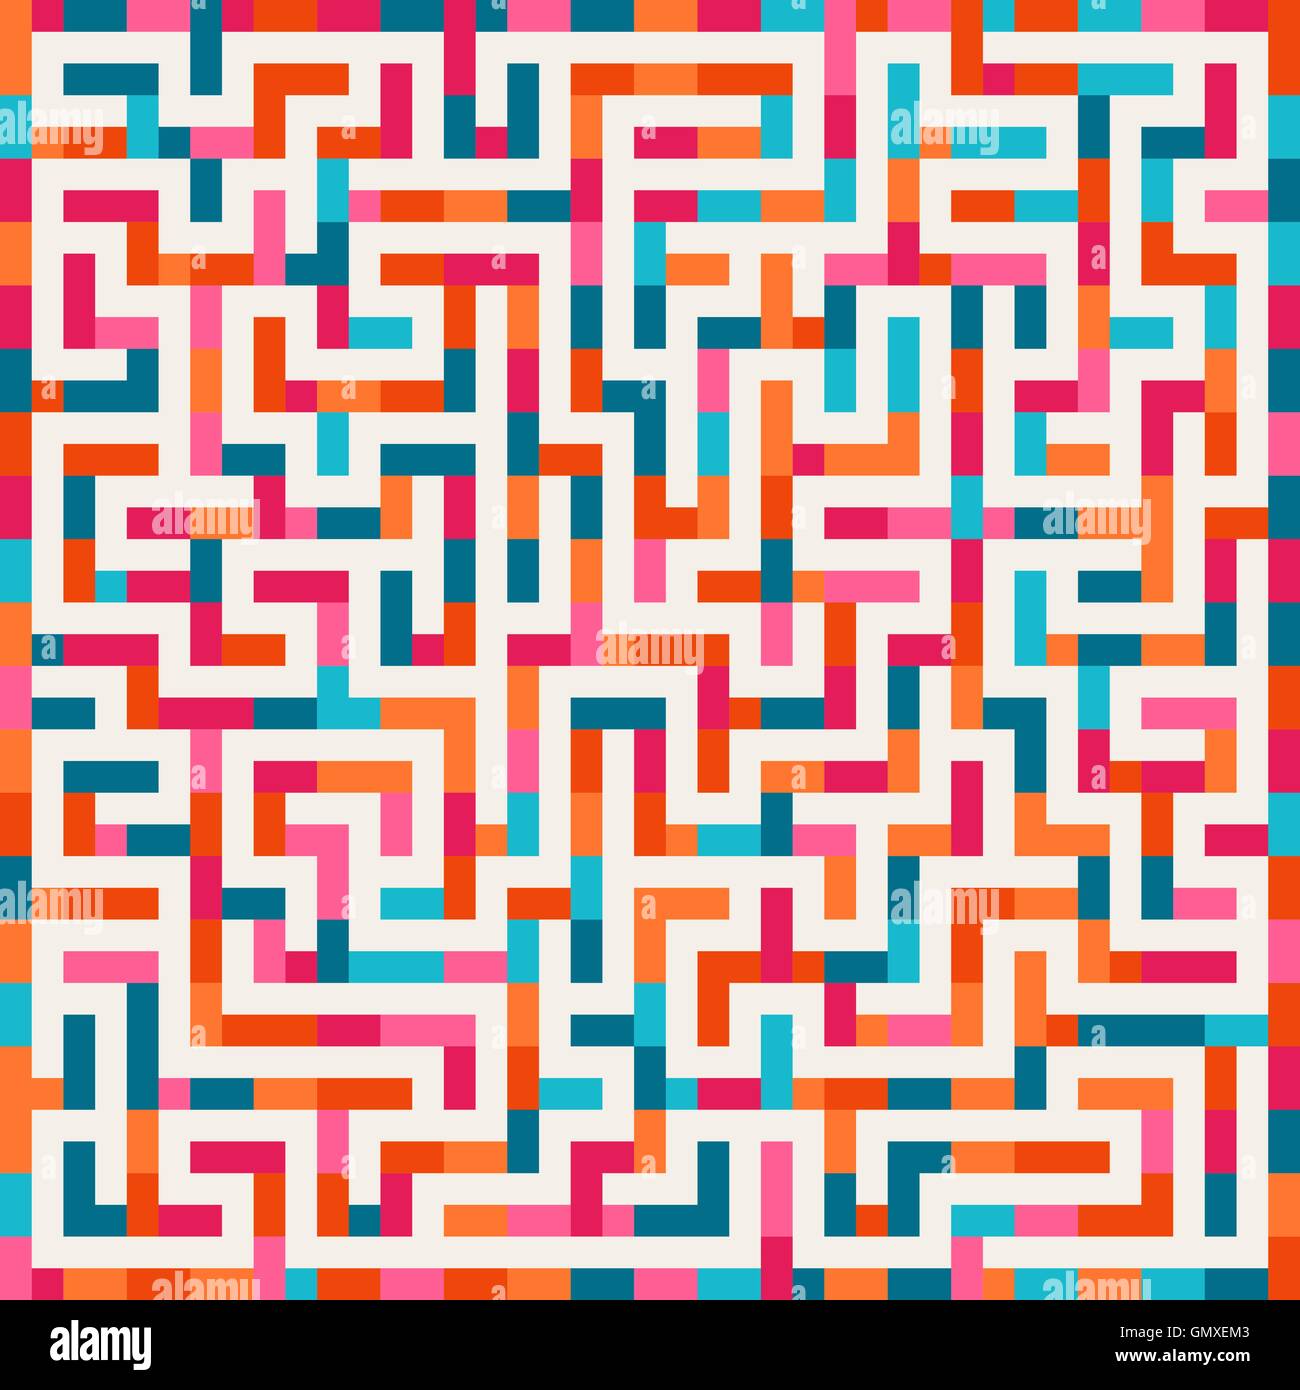 Vector Labyrinth Pink Orange Blue Maze Square on White Background Stock Vector